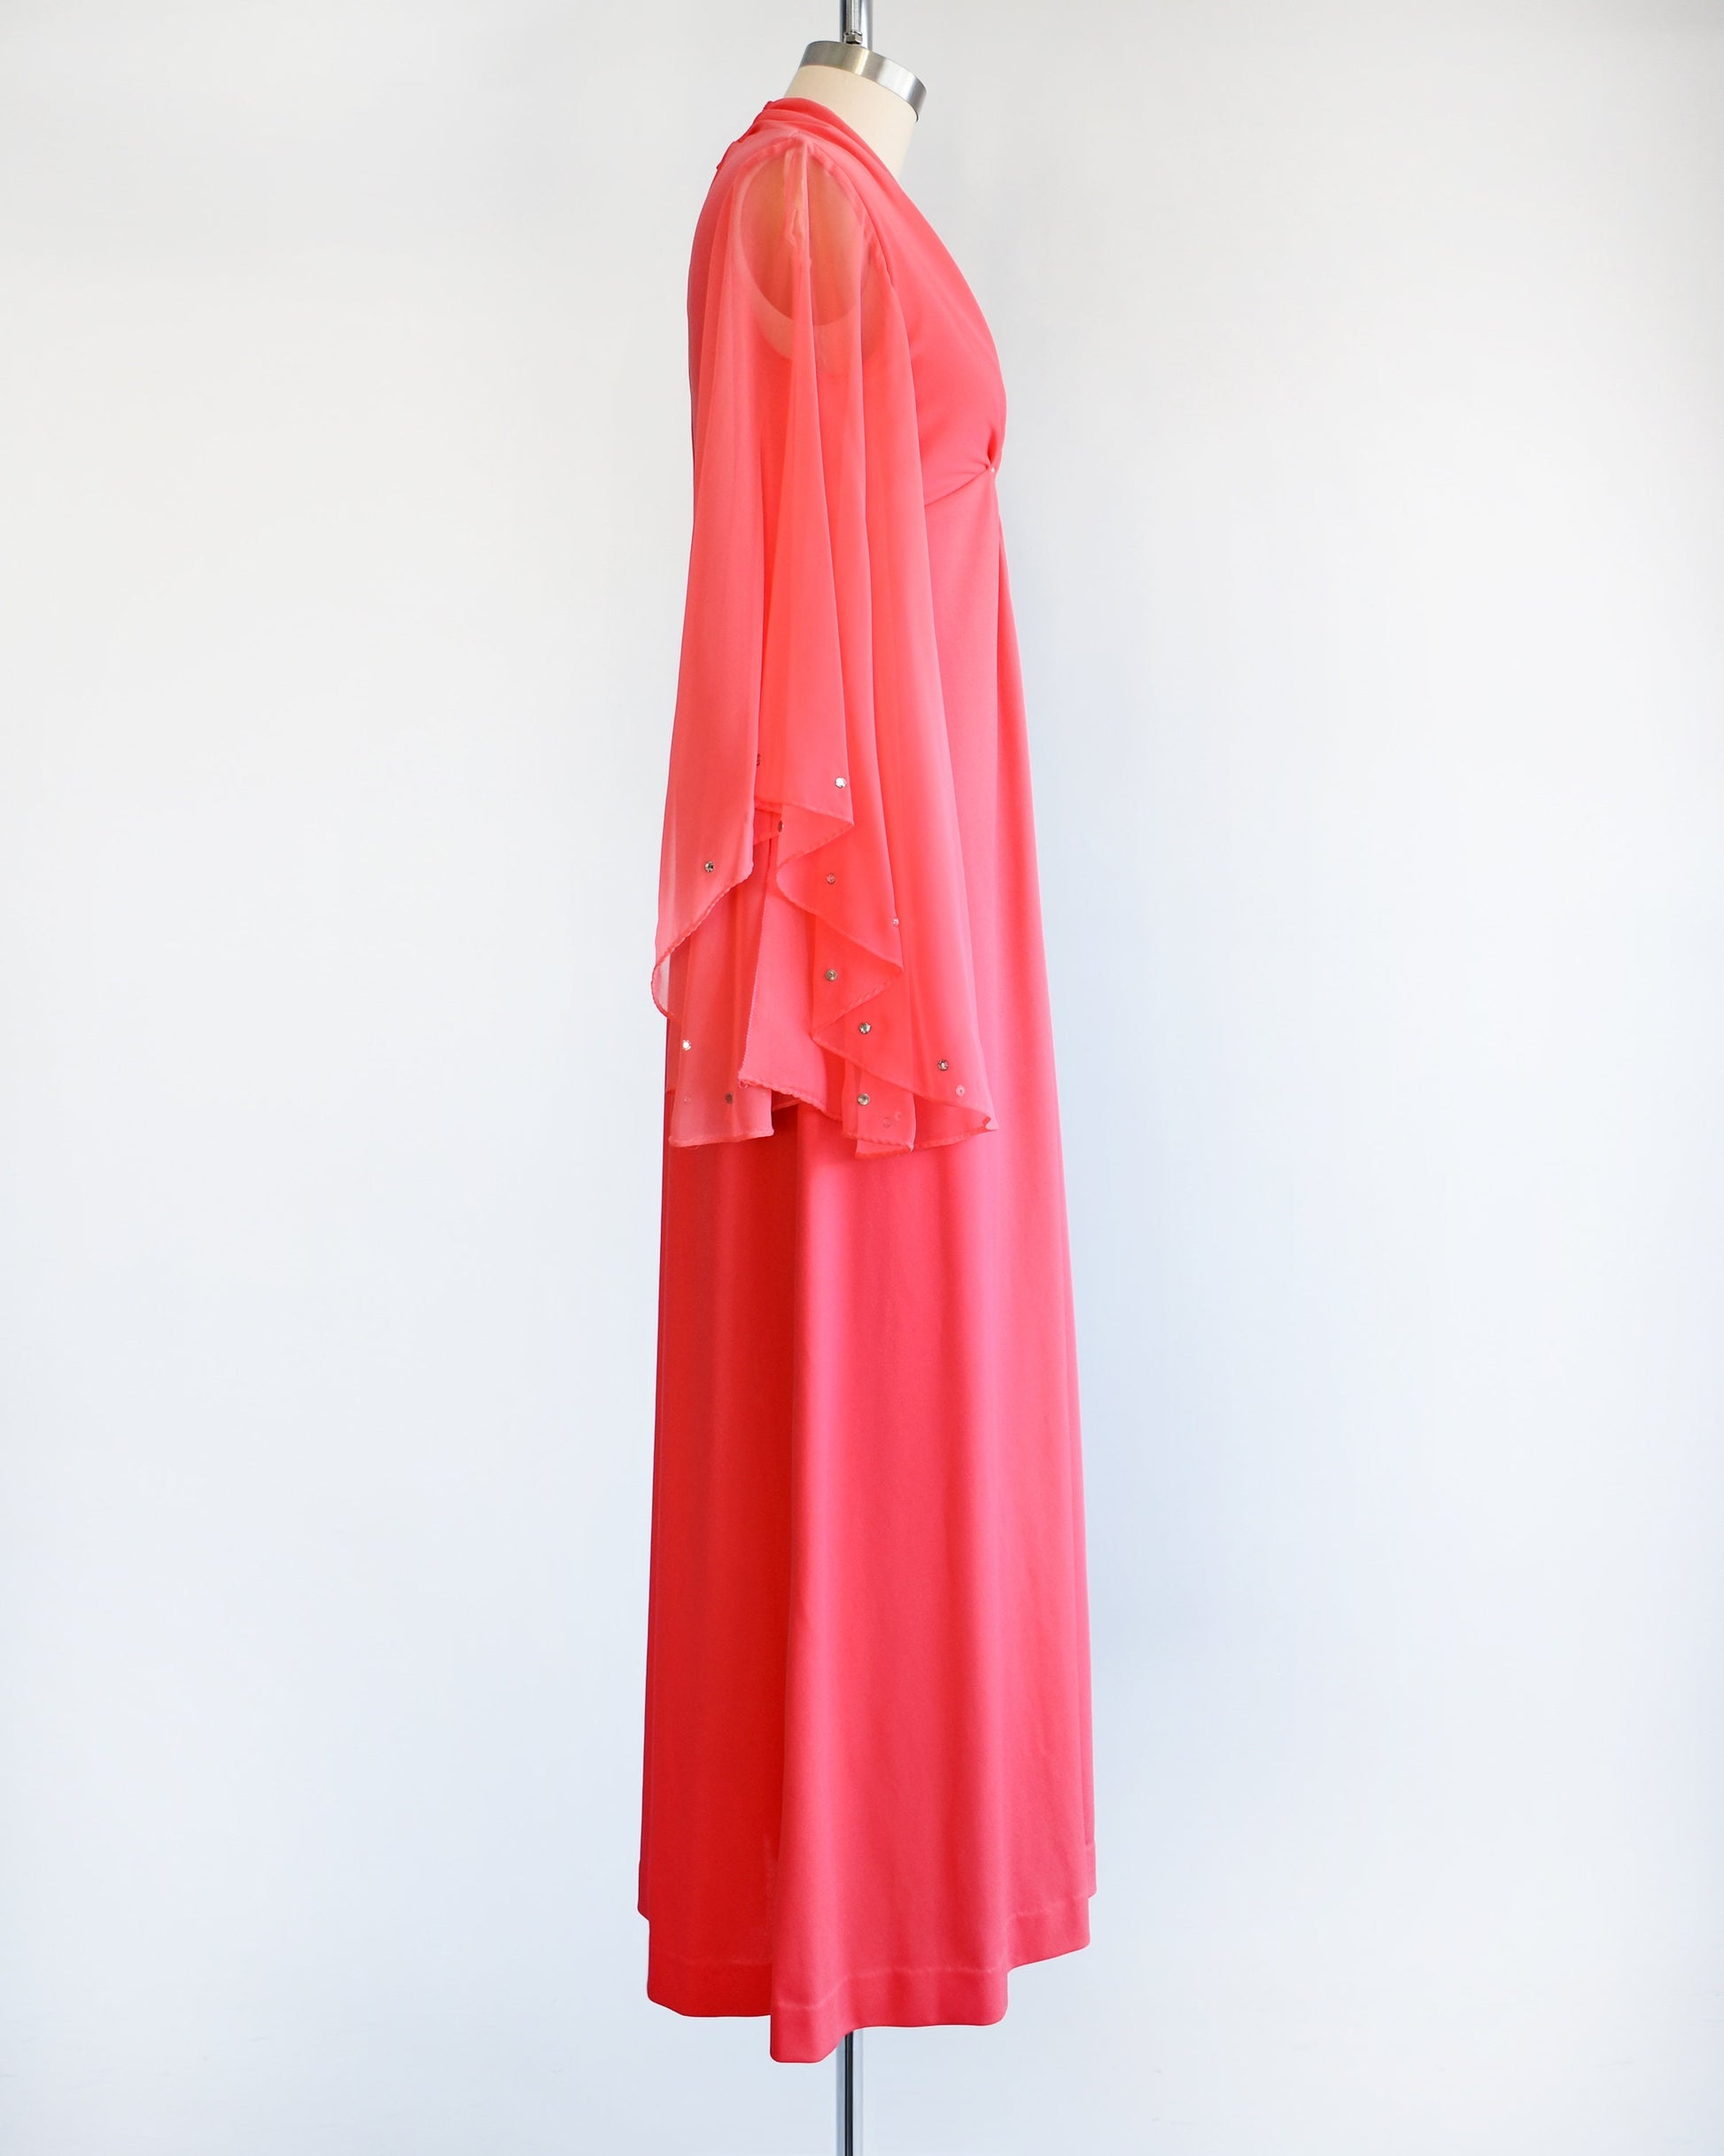 Side view of a vintage 70s coral pink maxi dress that has a v-neckline, rhinestones on the waist, and semi-sheer long angel sleeves with matching rhinestone trim. The dress is modeled on a dress form.